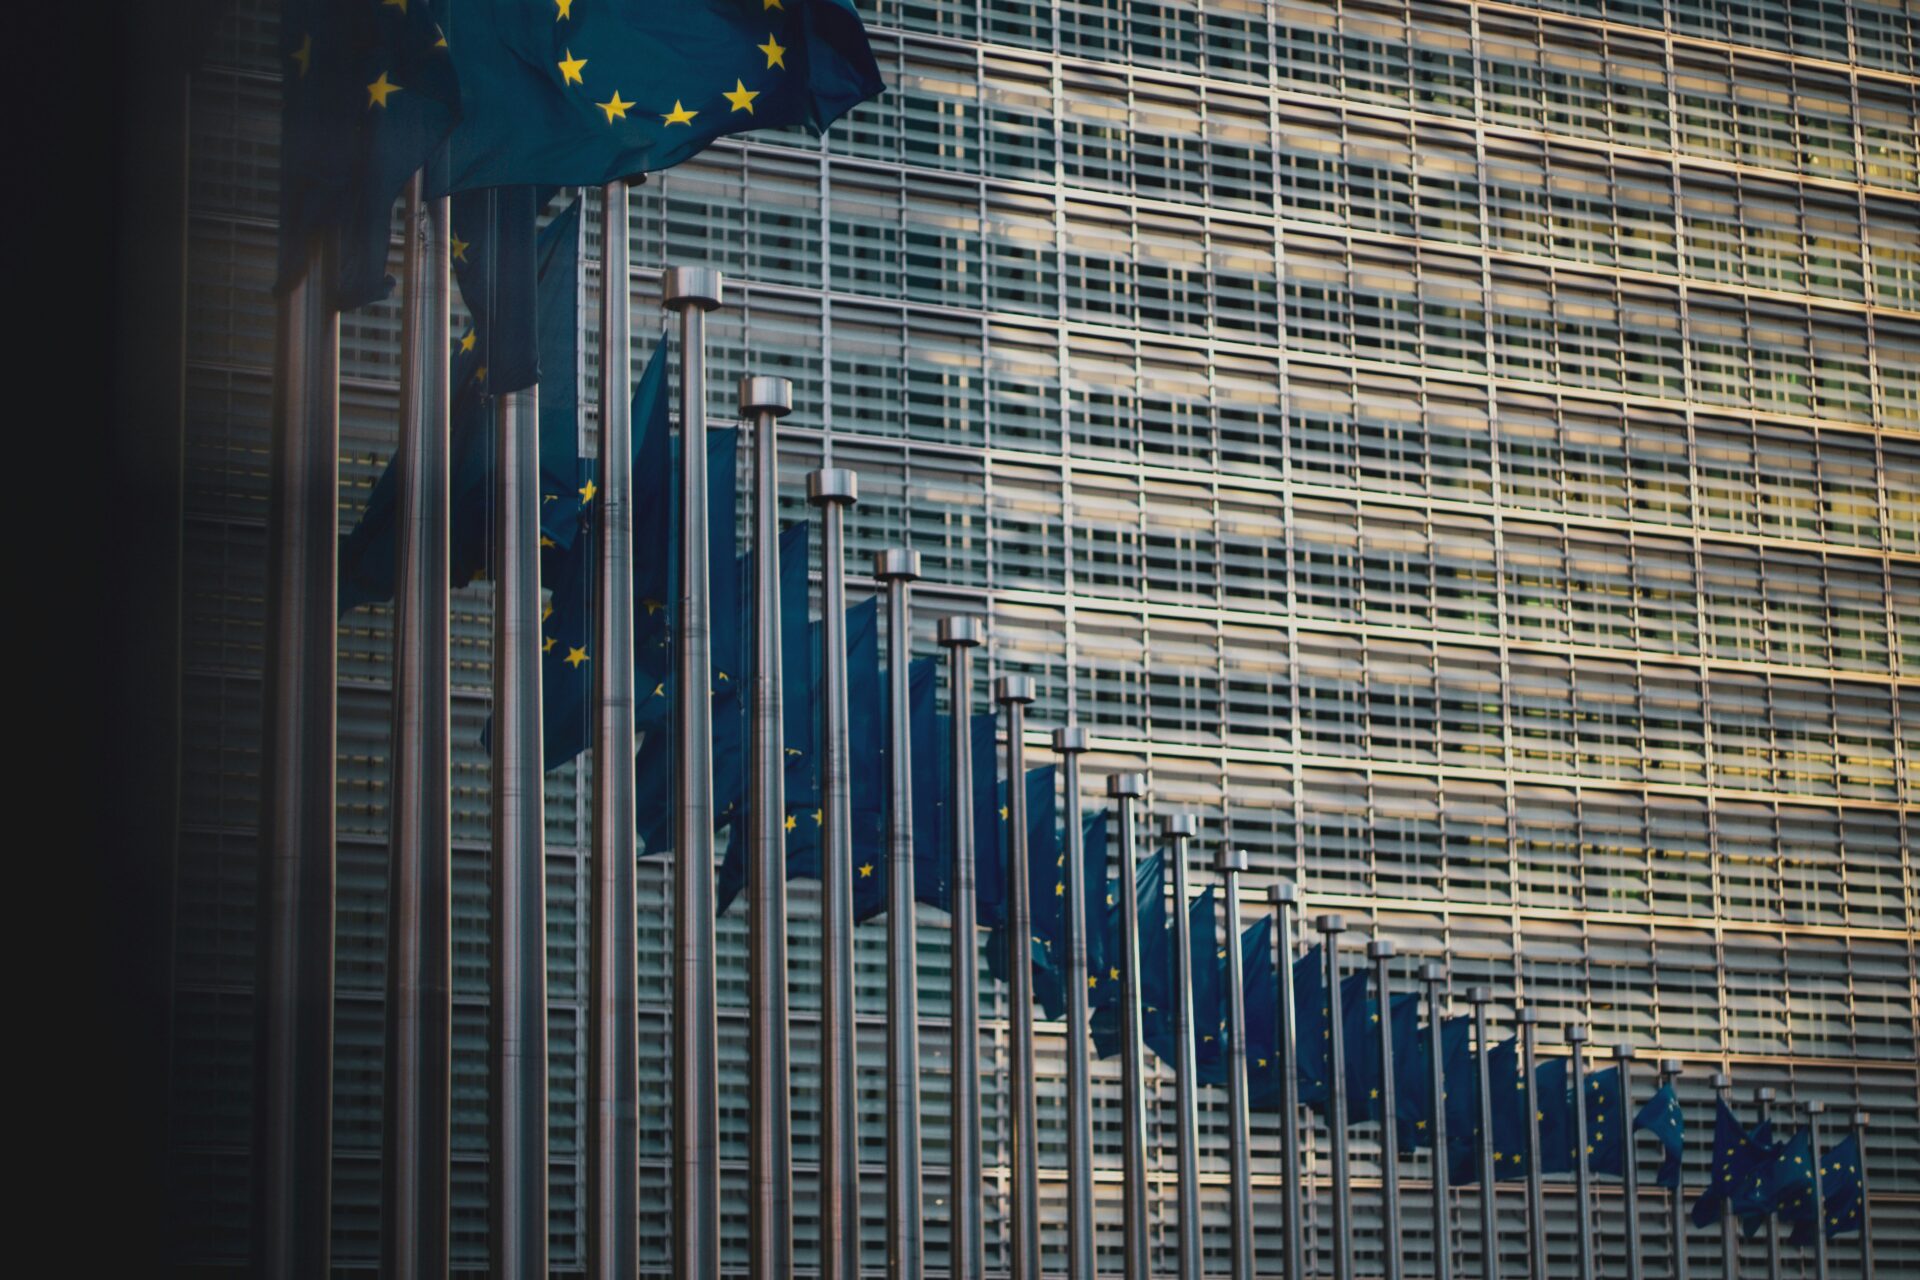 Flags of the member states of the European Union in front of the EU-commission building "Berlaymont" in Brussels, Belgium (Christian Lue via Unsplash)